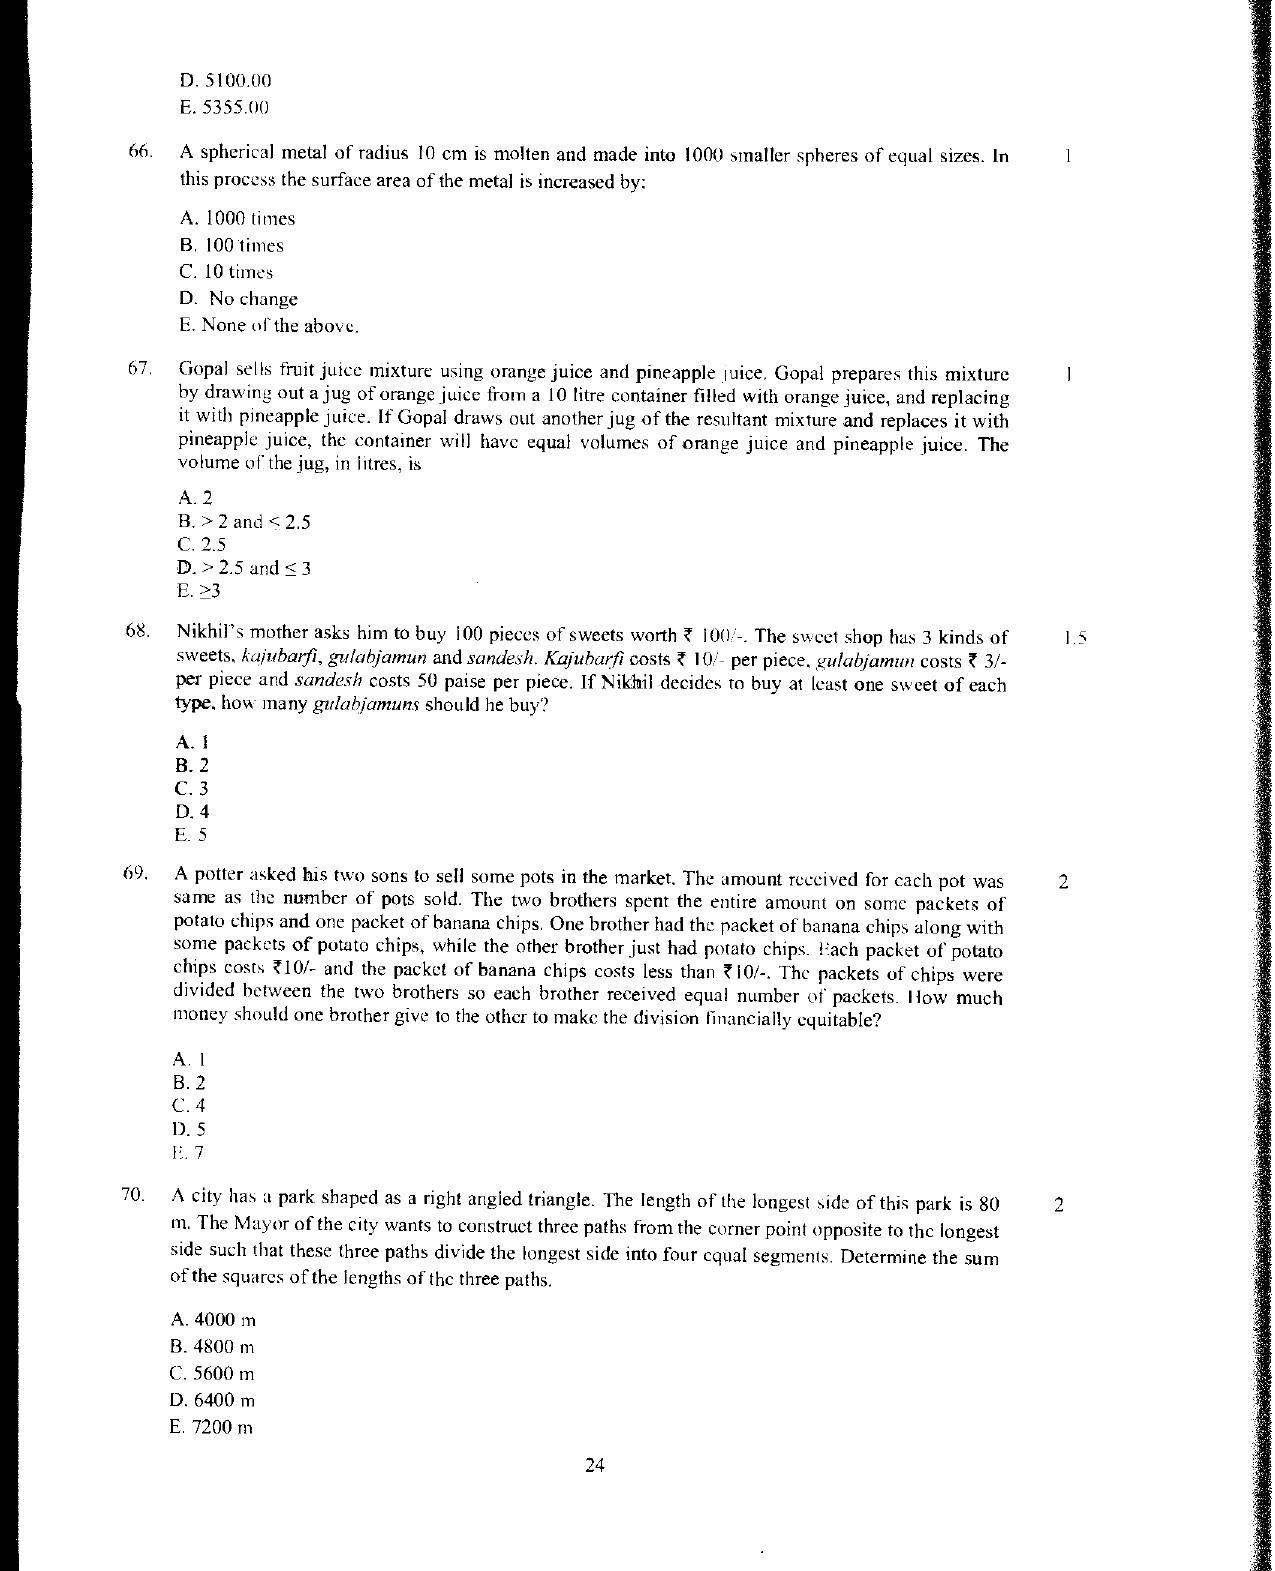 XAT 2012 Question Papers - Page 25